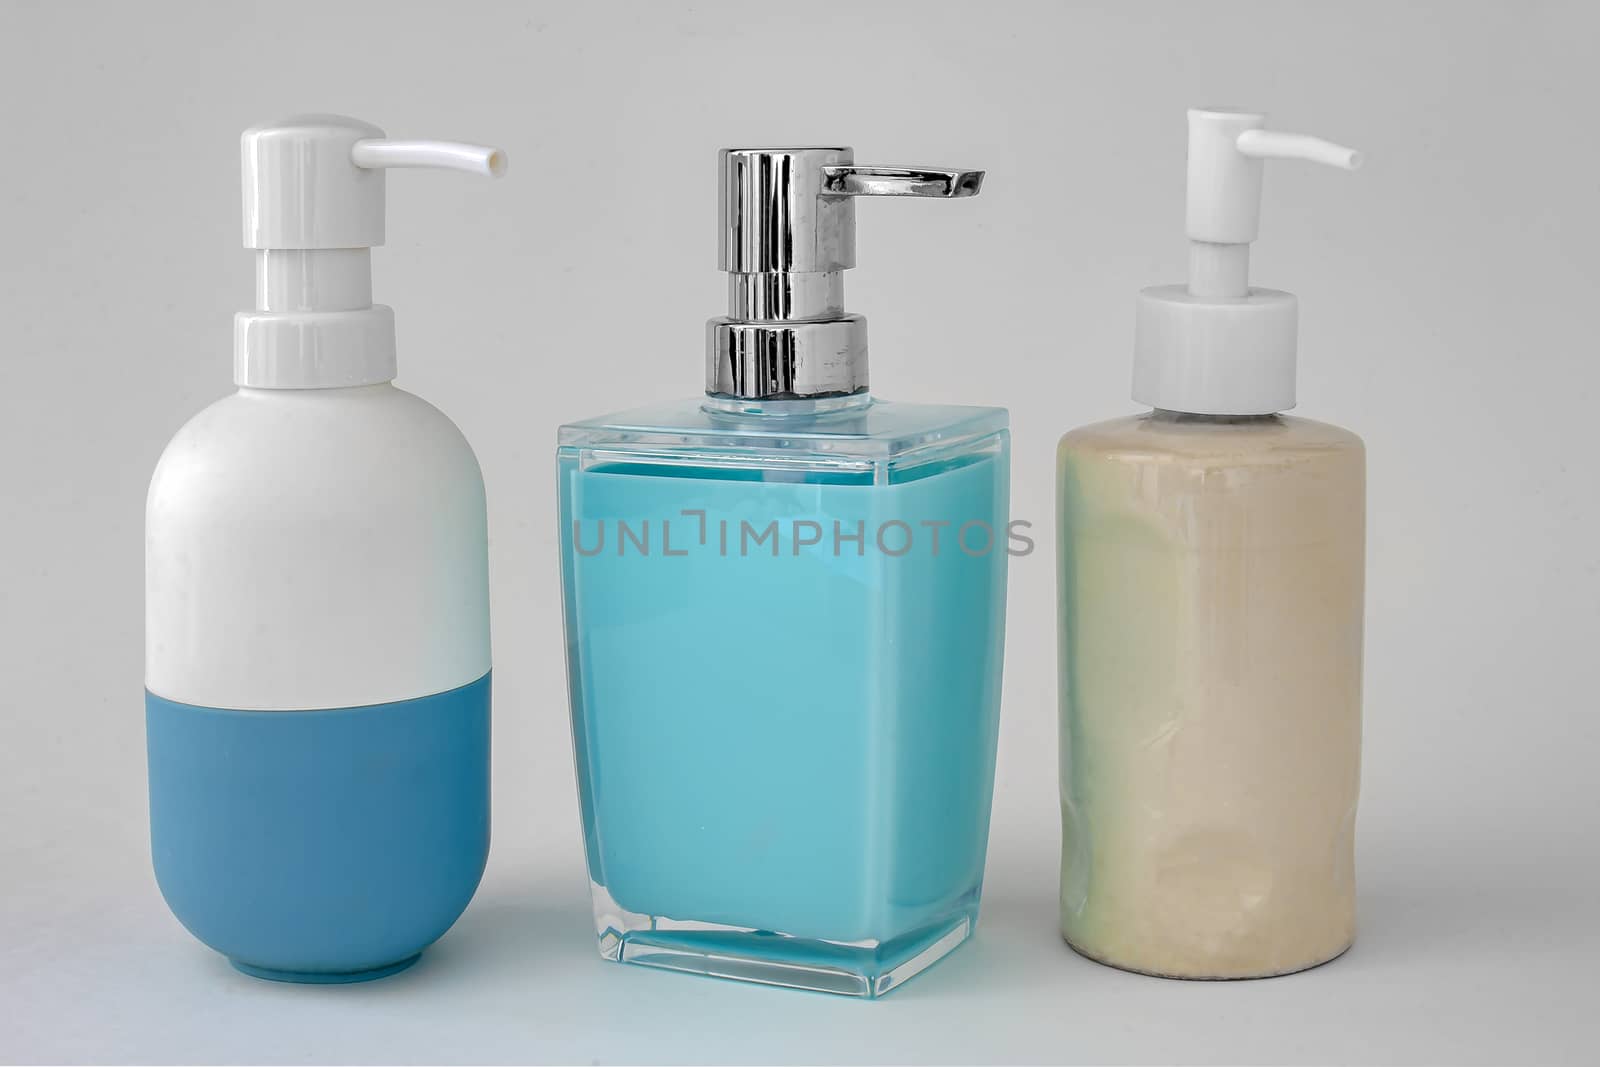 Colorful soap dispenser for bathrooms or kitchen sinks on a white background by oasisamuel